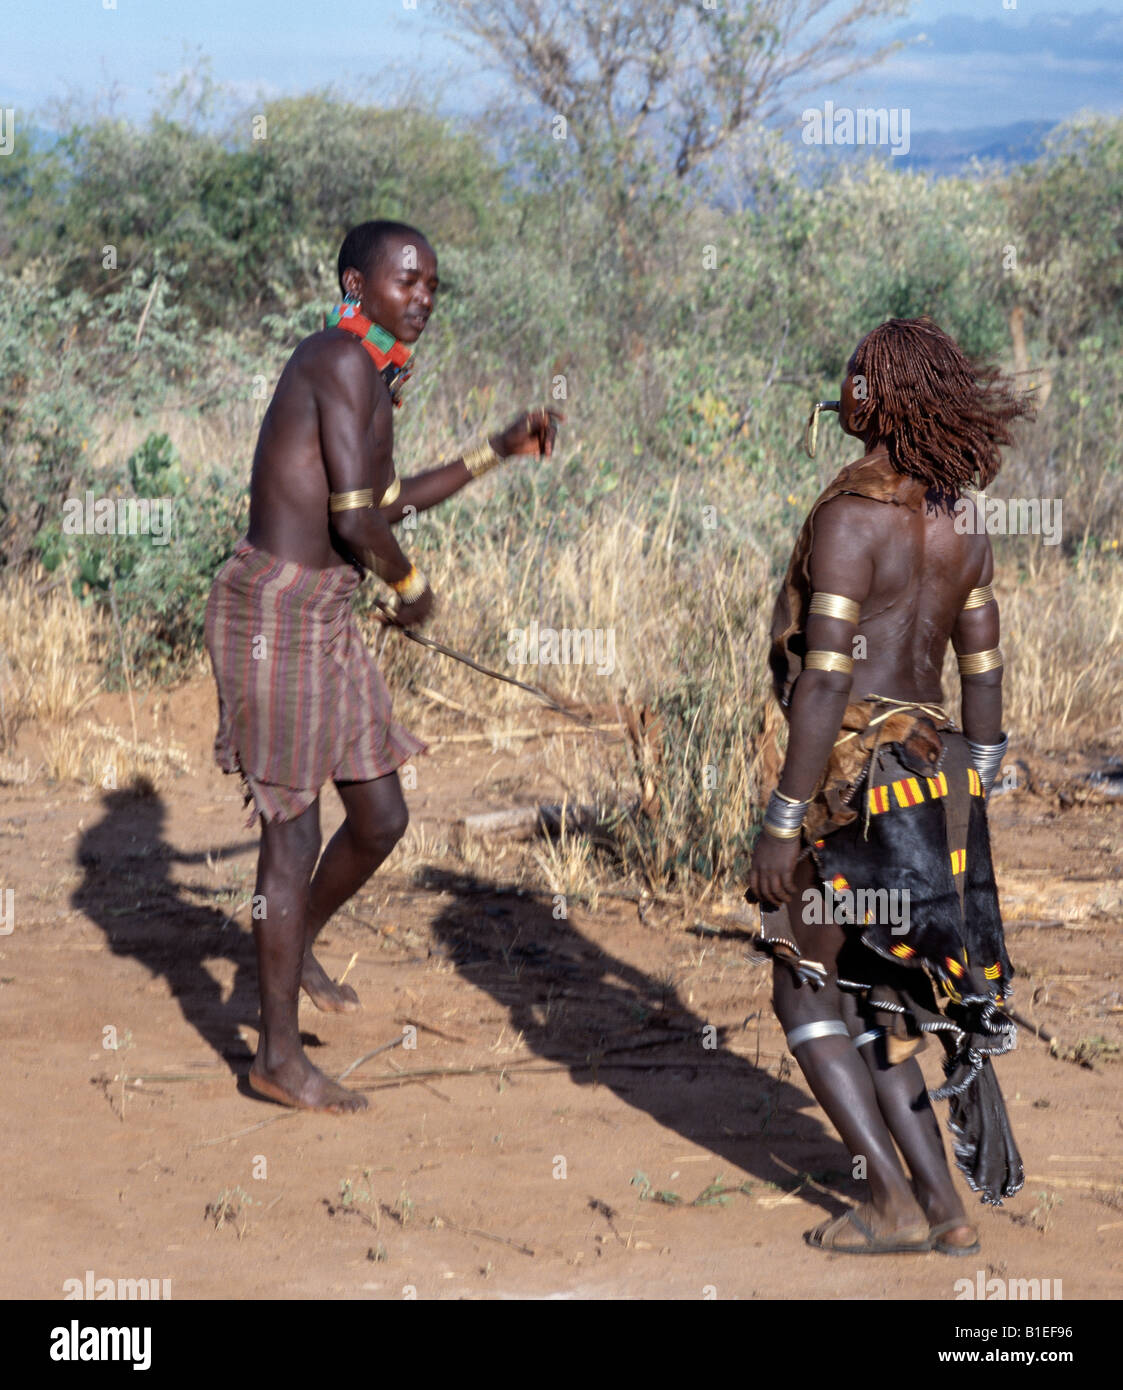 A Hamar woman being whipped duuring a Hamar 'Jumping of the Bull' ceremony. Stock Photo